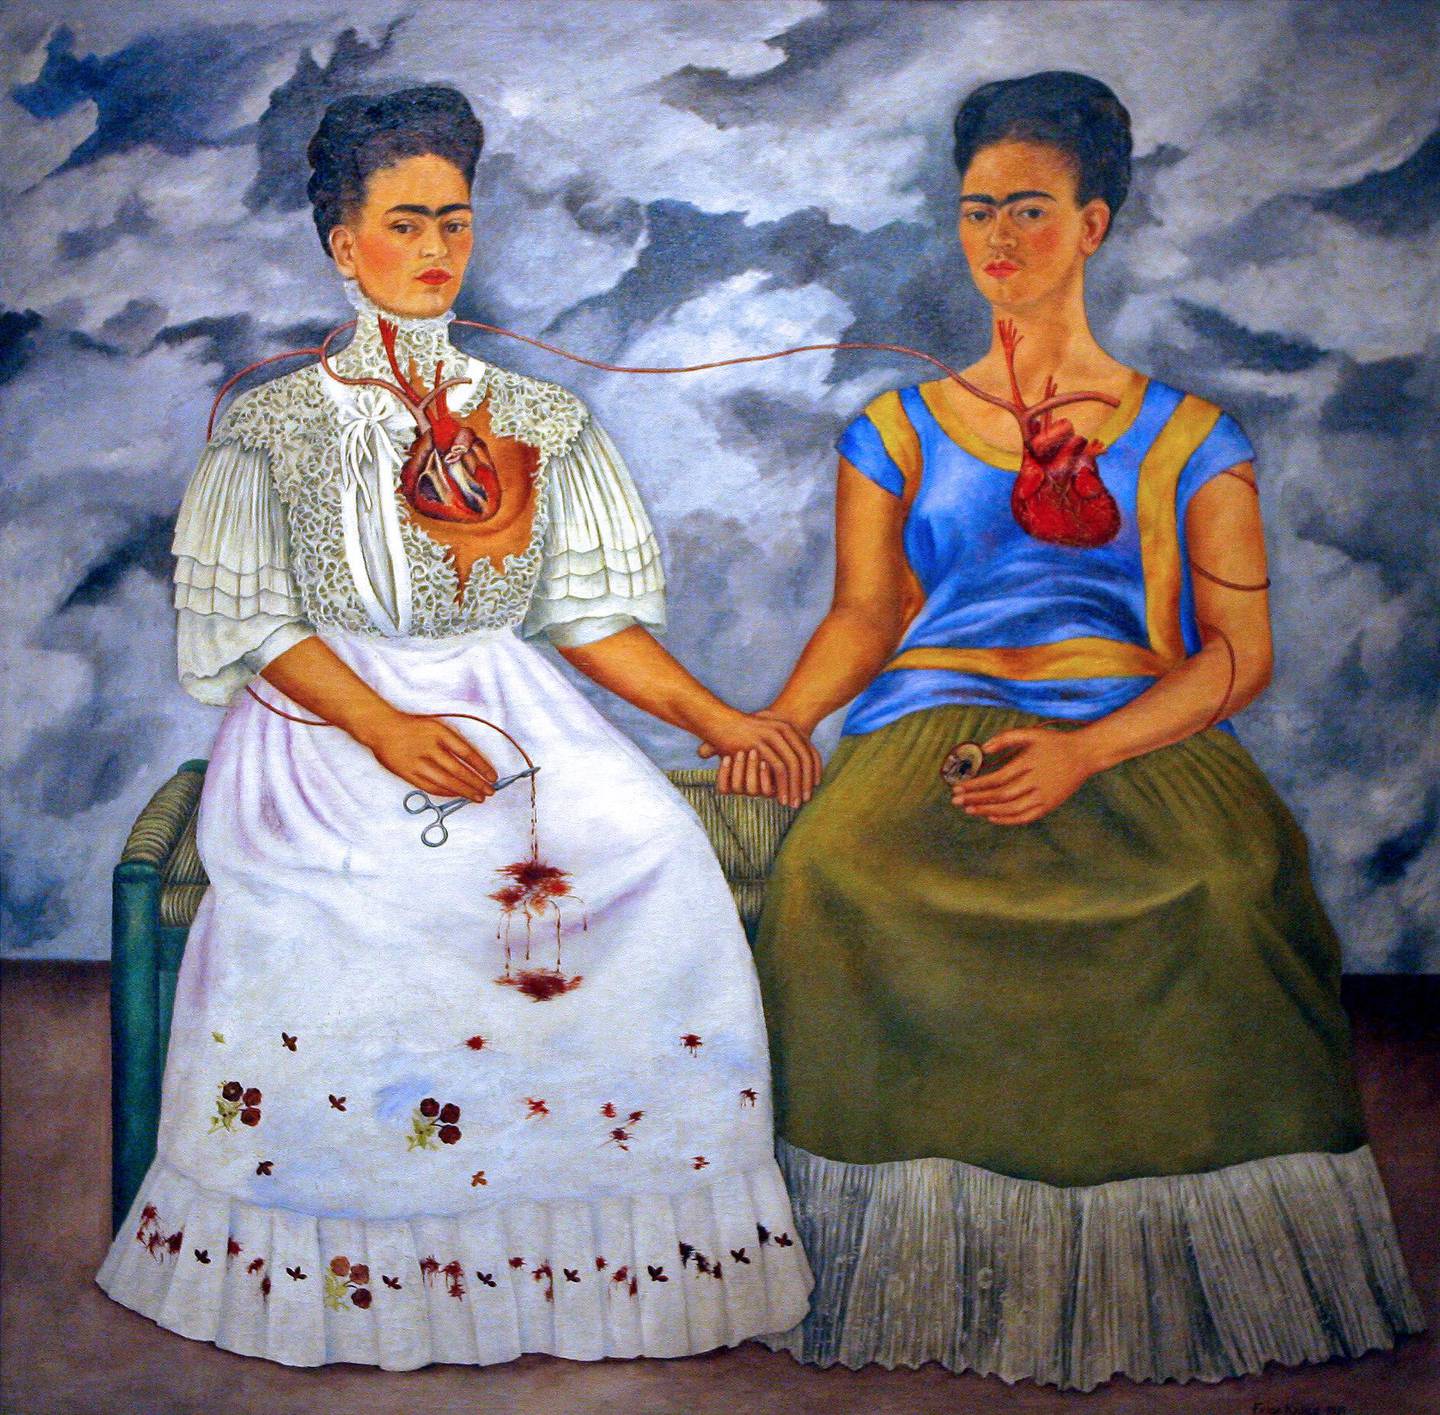 'The Two Fridas' (1939) is a double self-portrait, depicting two versions of Kahlo seated together. Micro-Folie